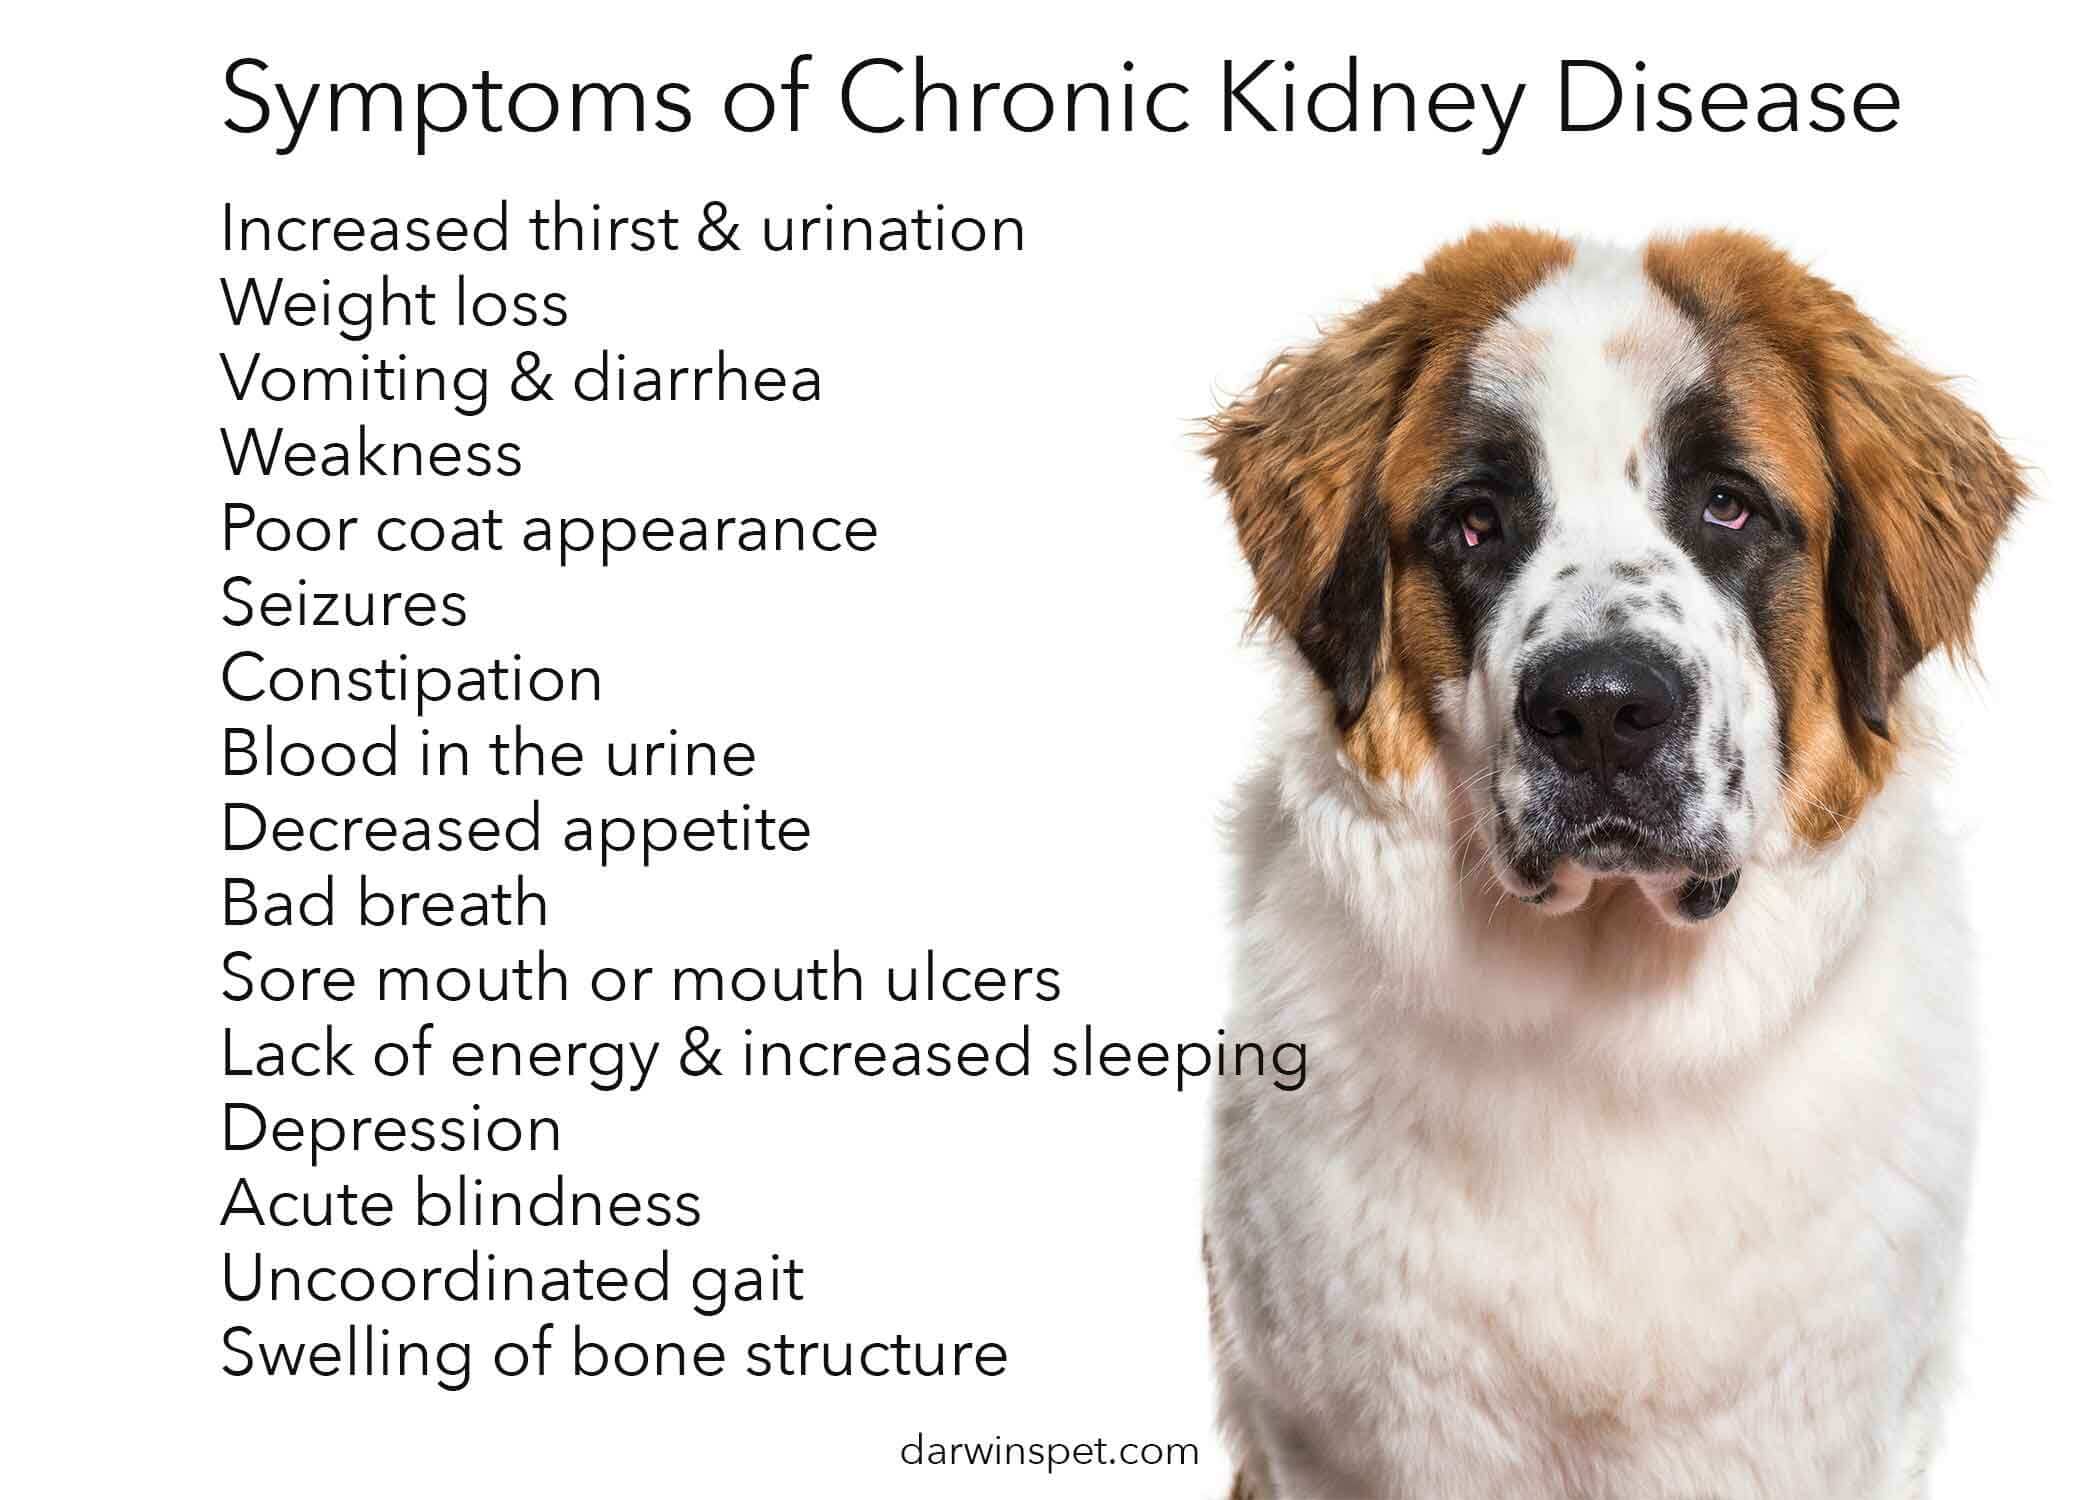 How long can a dog live with kidney failure